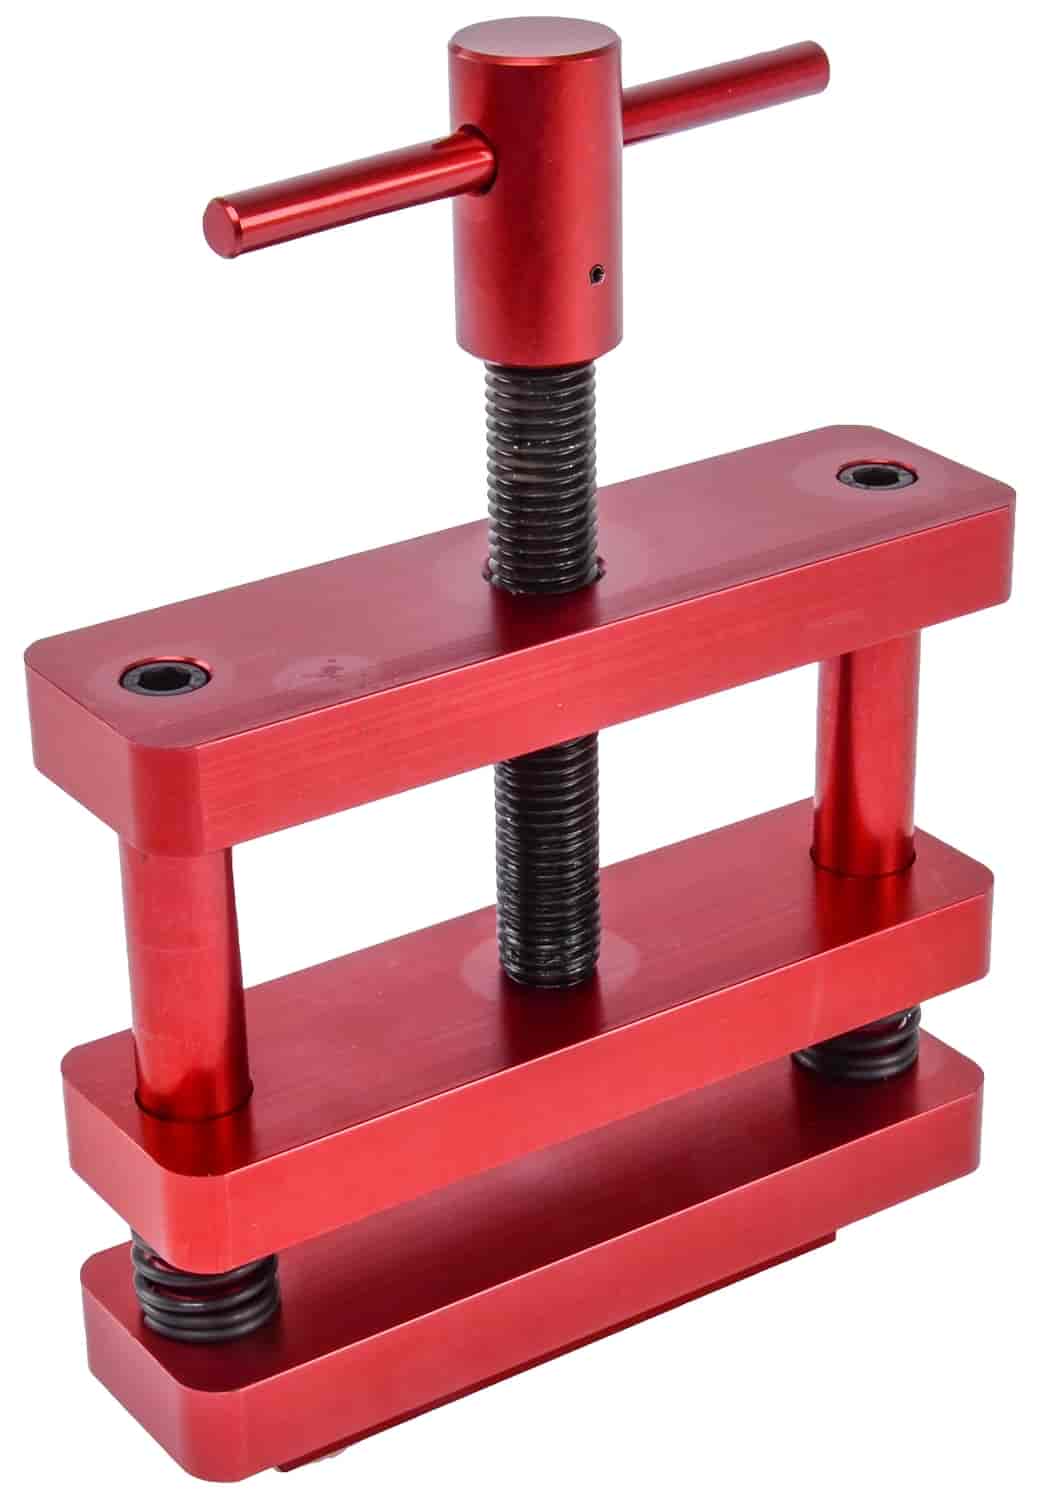 Connecting Rod Vise